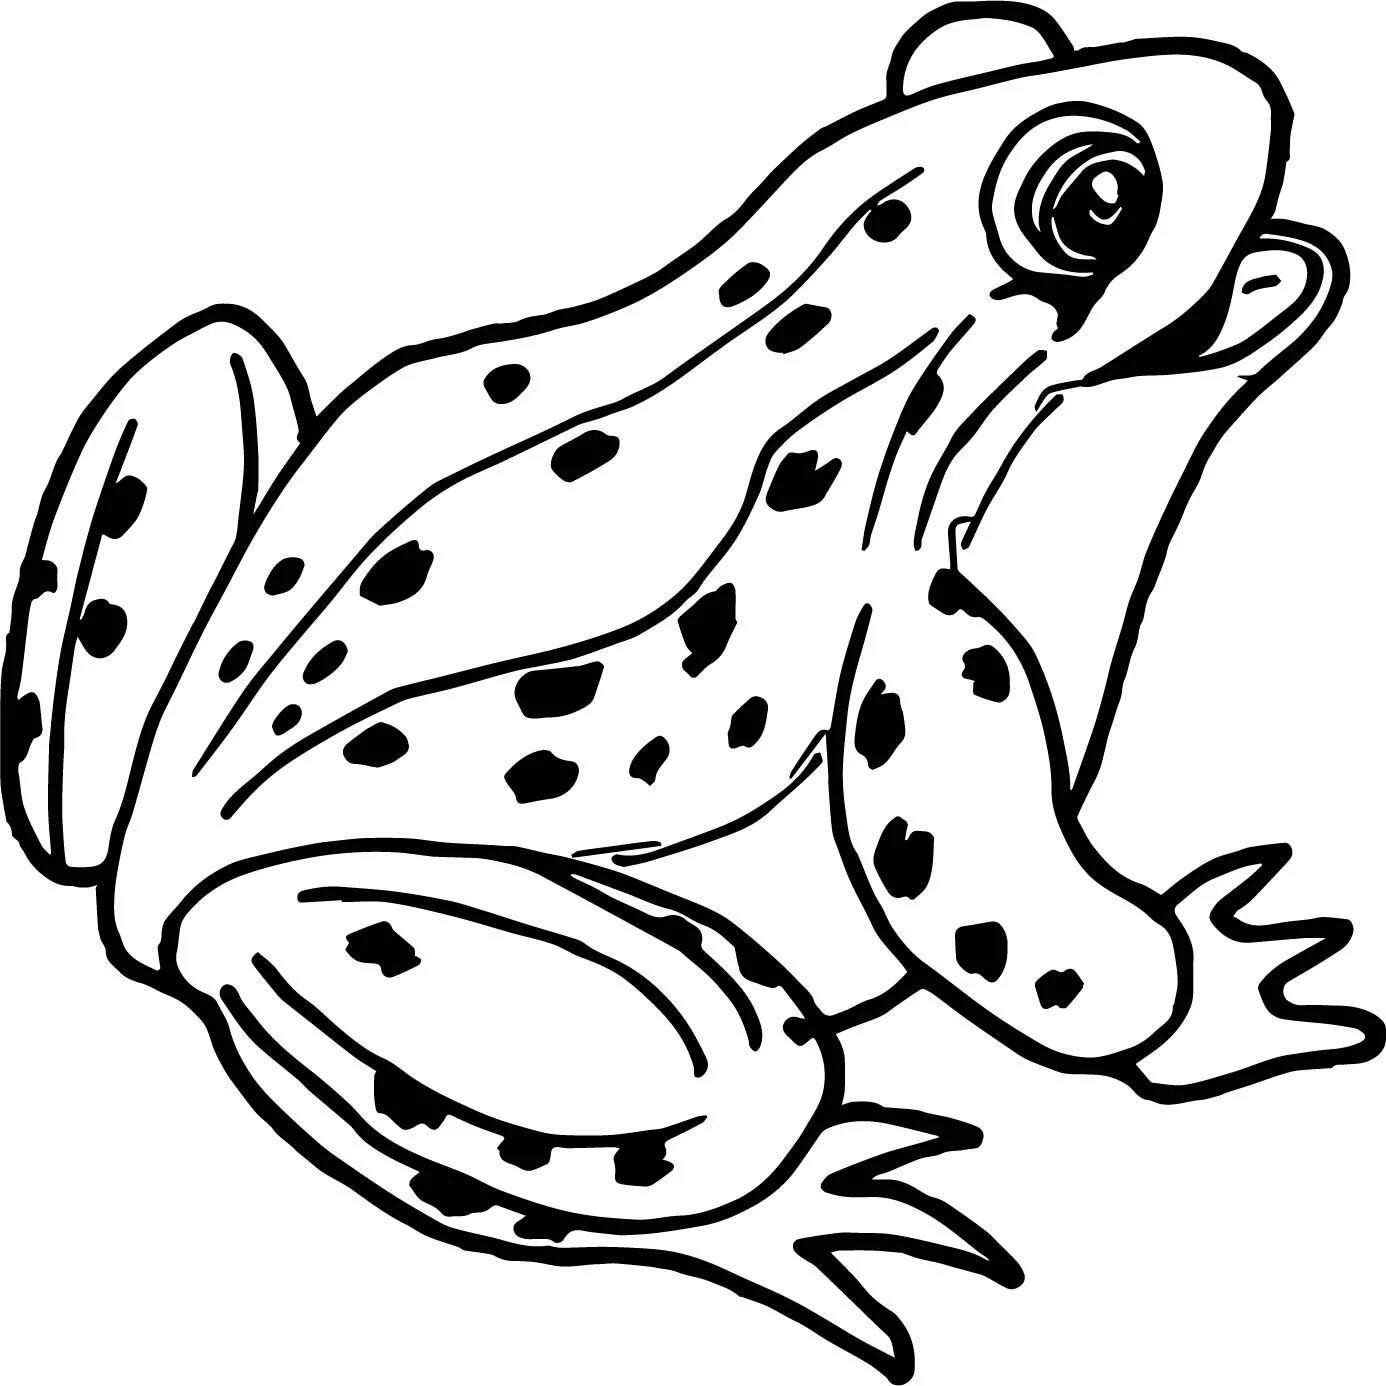 Humorous toad coloring book for children